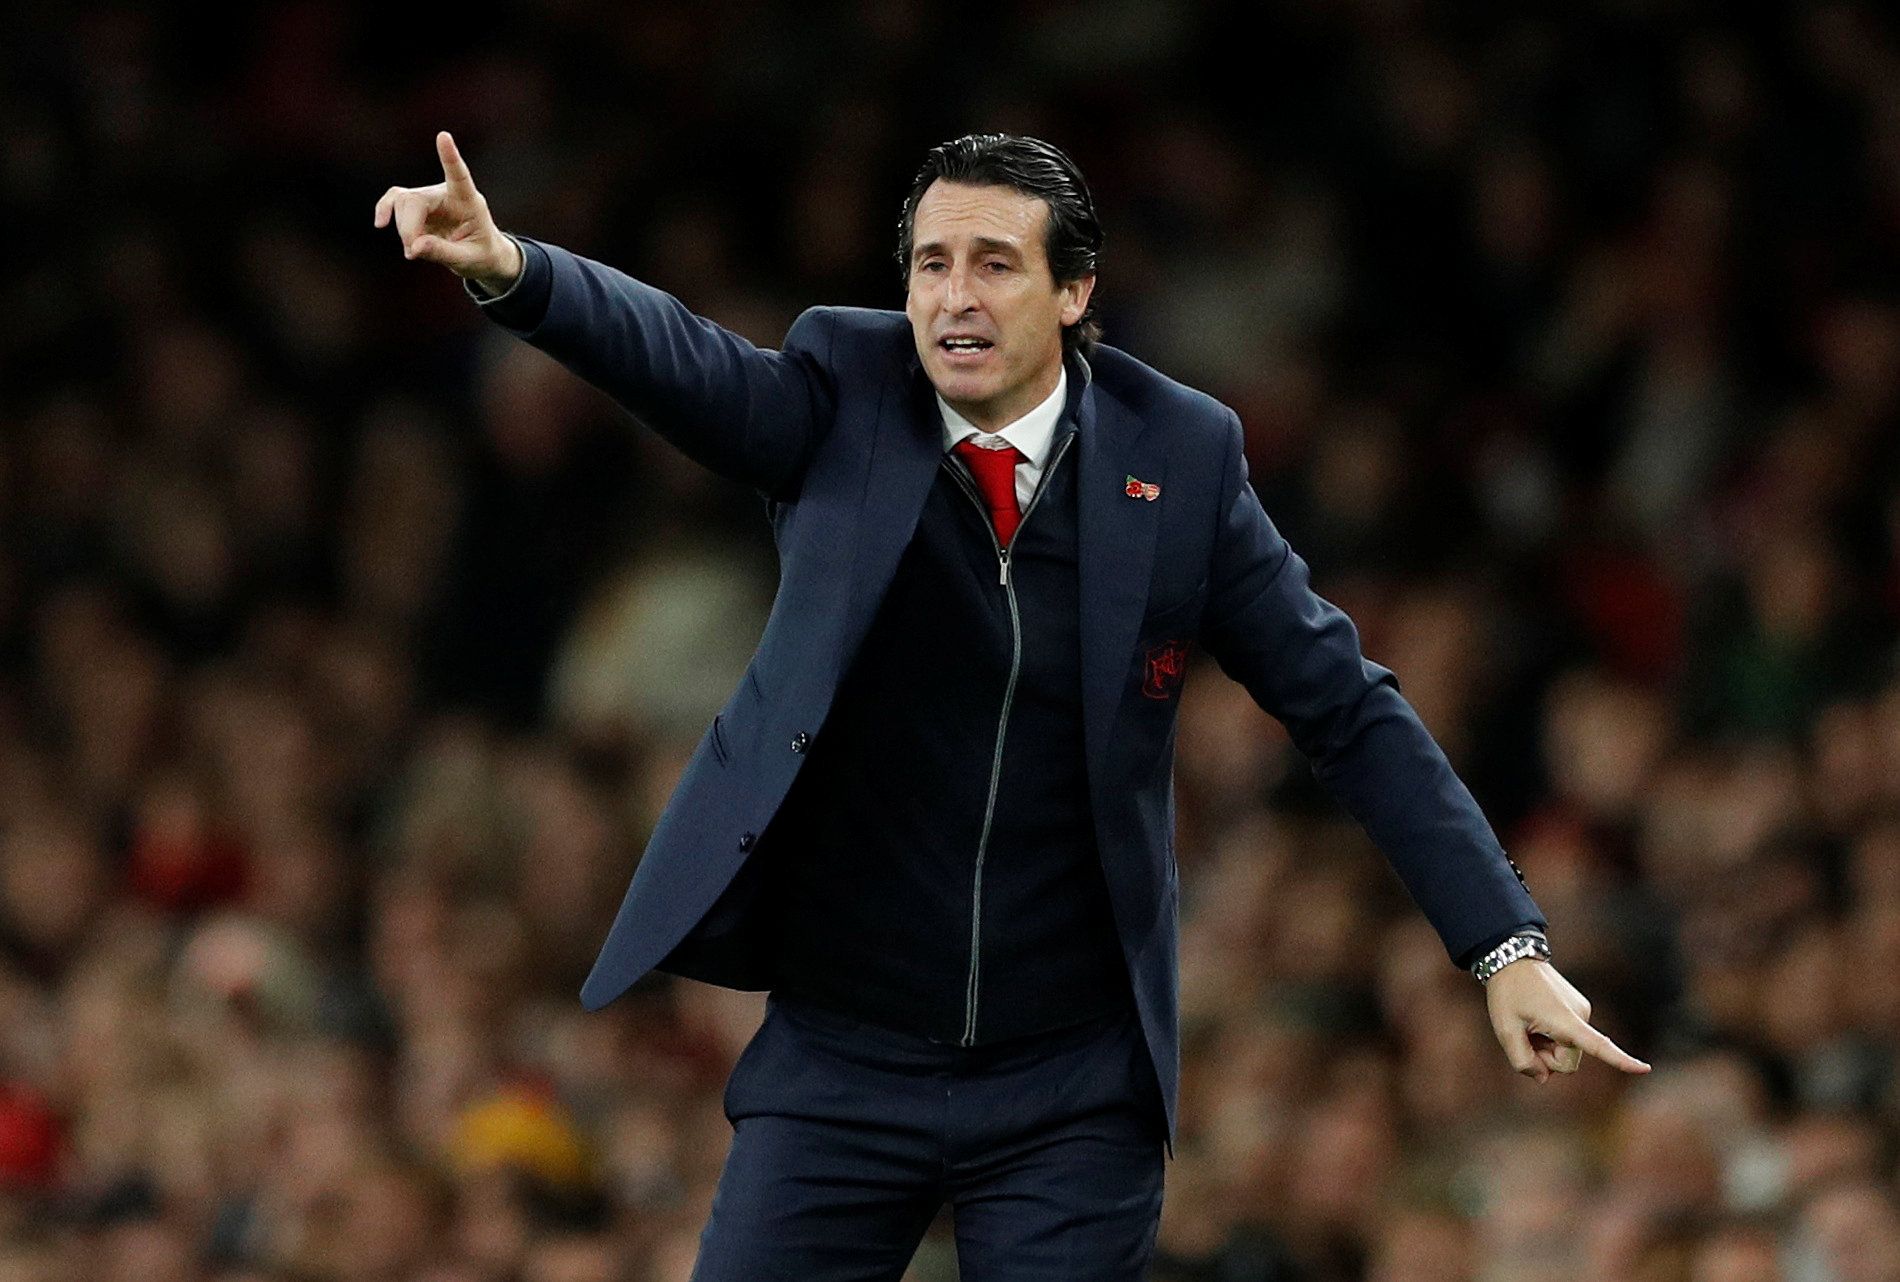 Unai Emery gives orders from the touchline